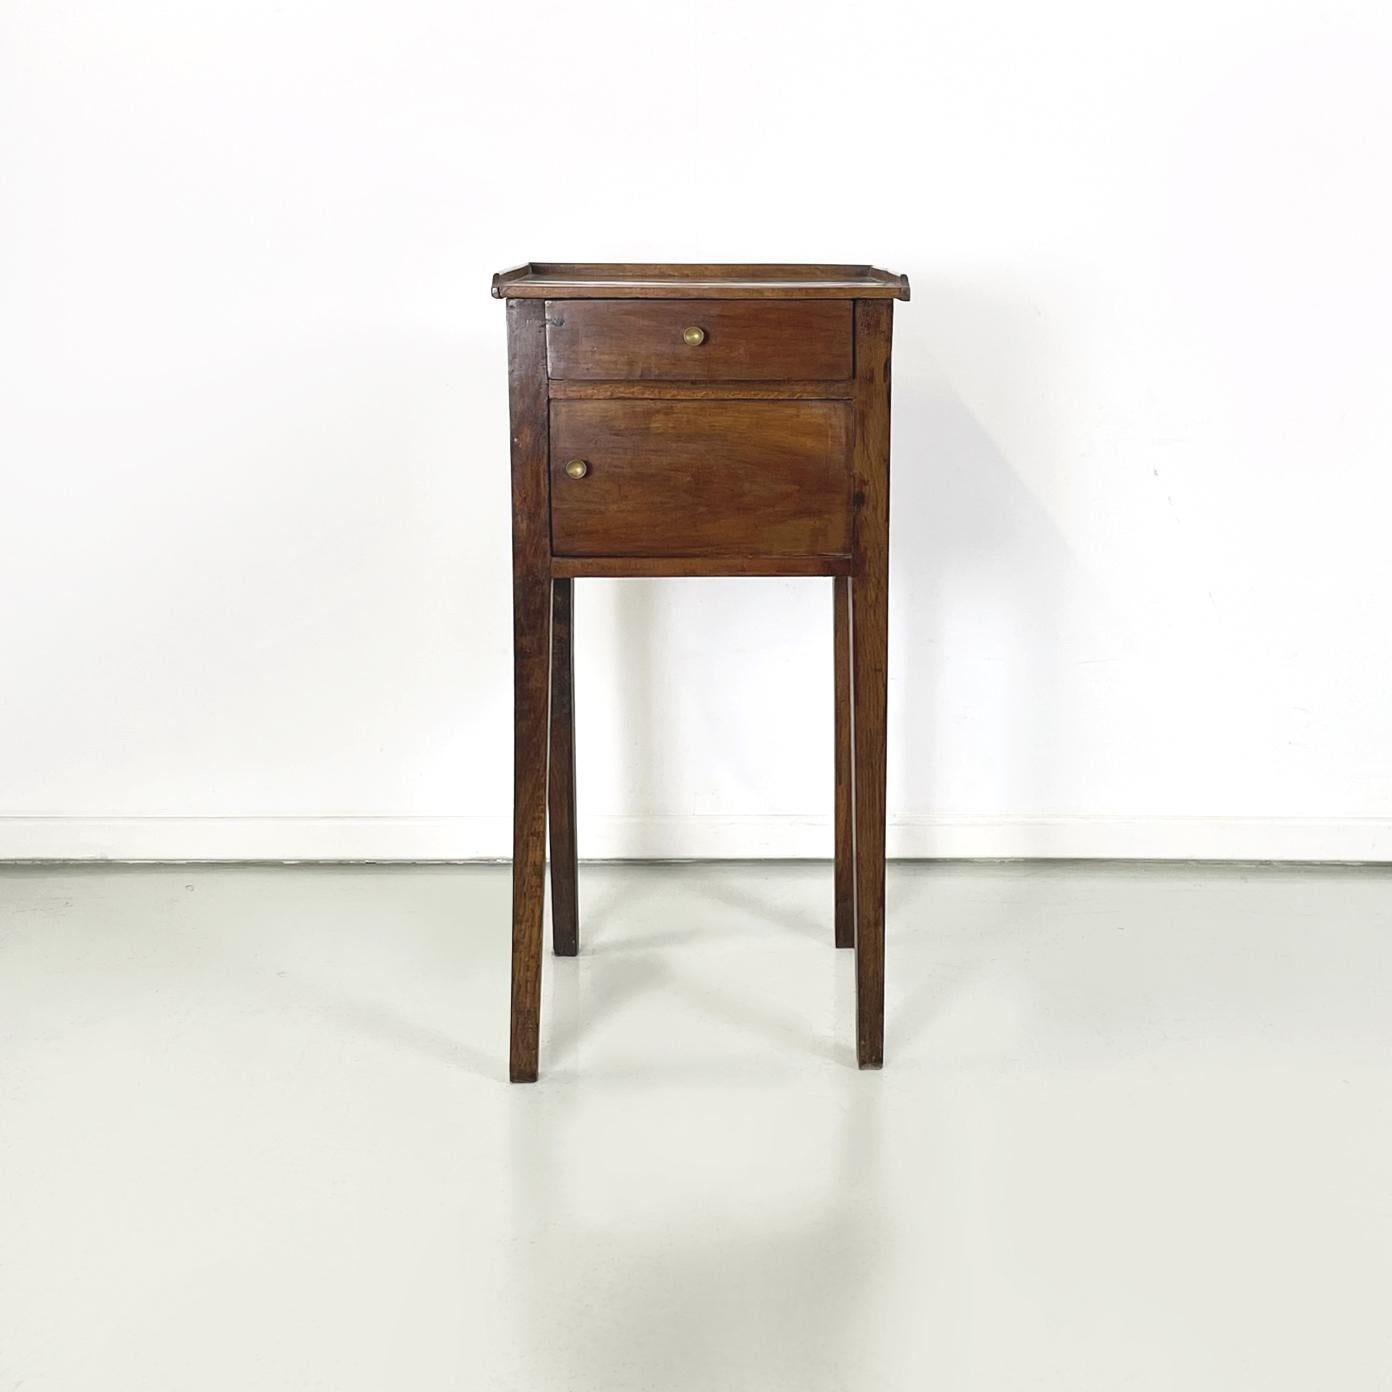 Italian antique Wooden bedside table with brass handle, early 1900s
Bedside table or service table with rectangular top, entirely in solid wood. On the front it has a drawer and a compartment with a hinged door. Round base handles in burnished